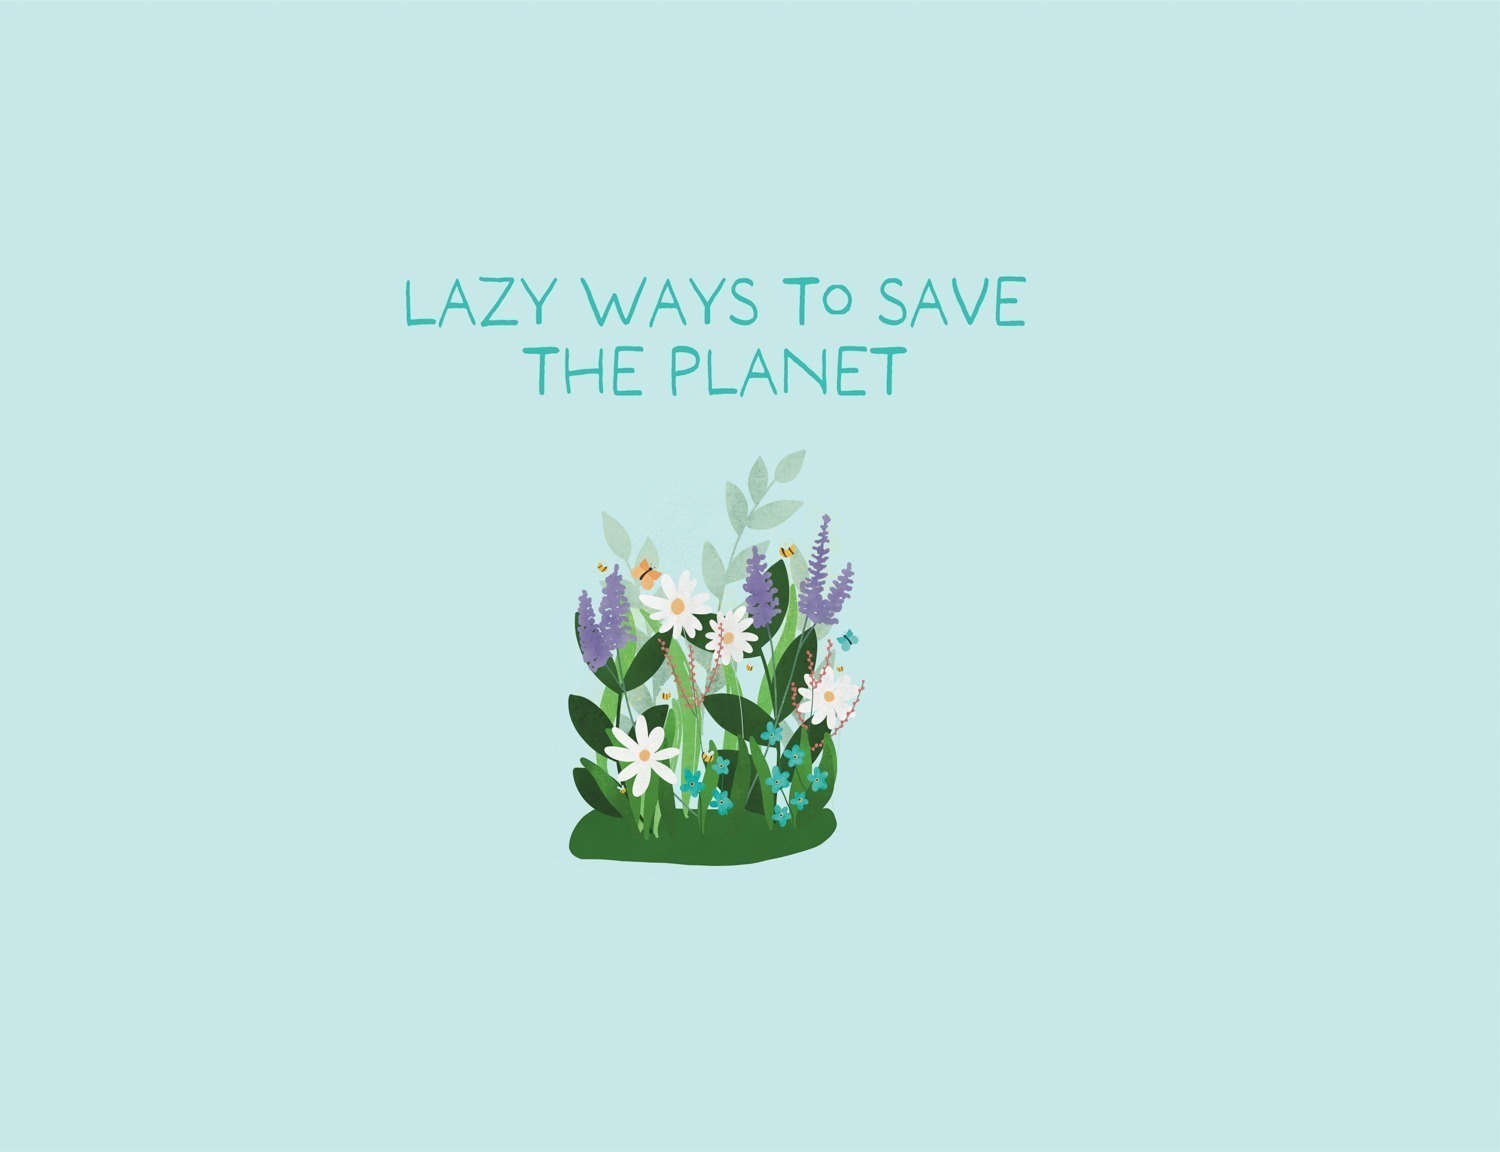 Illustration of flowers with the text "lazy ways to save the planet" above them.